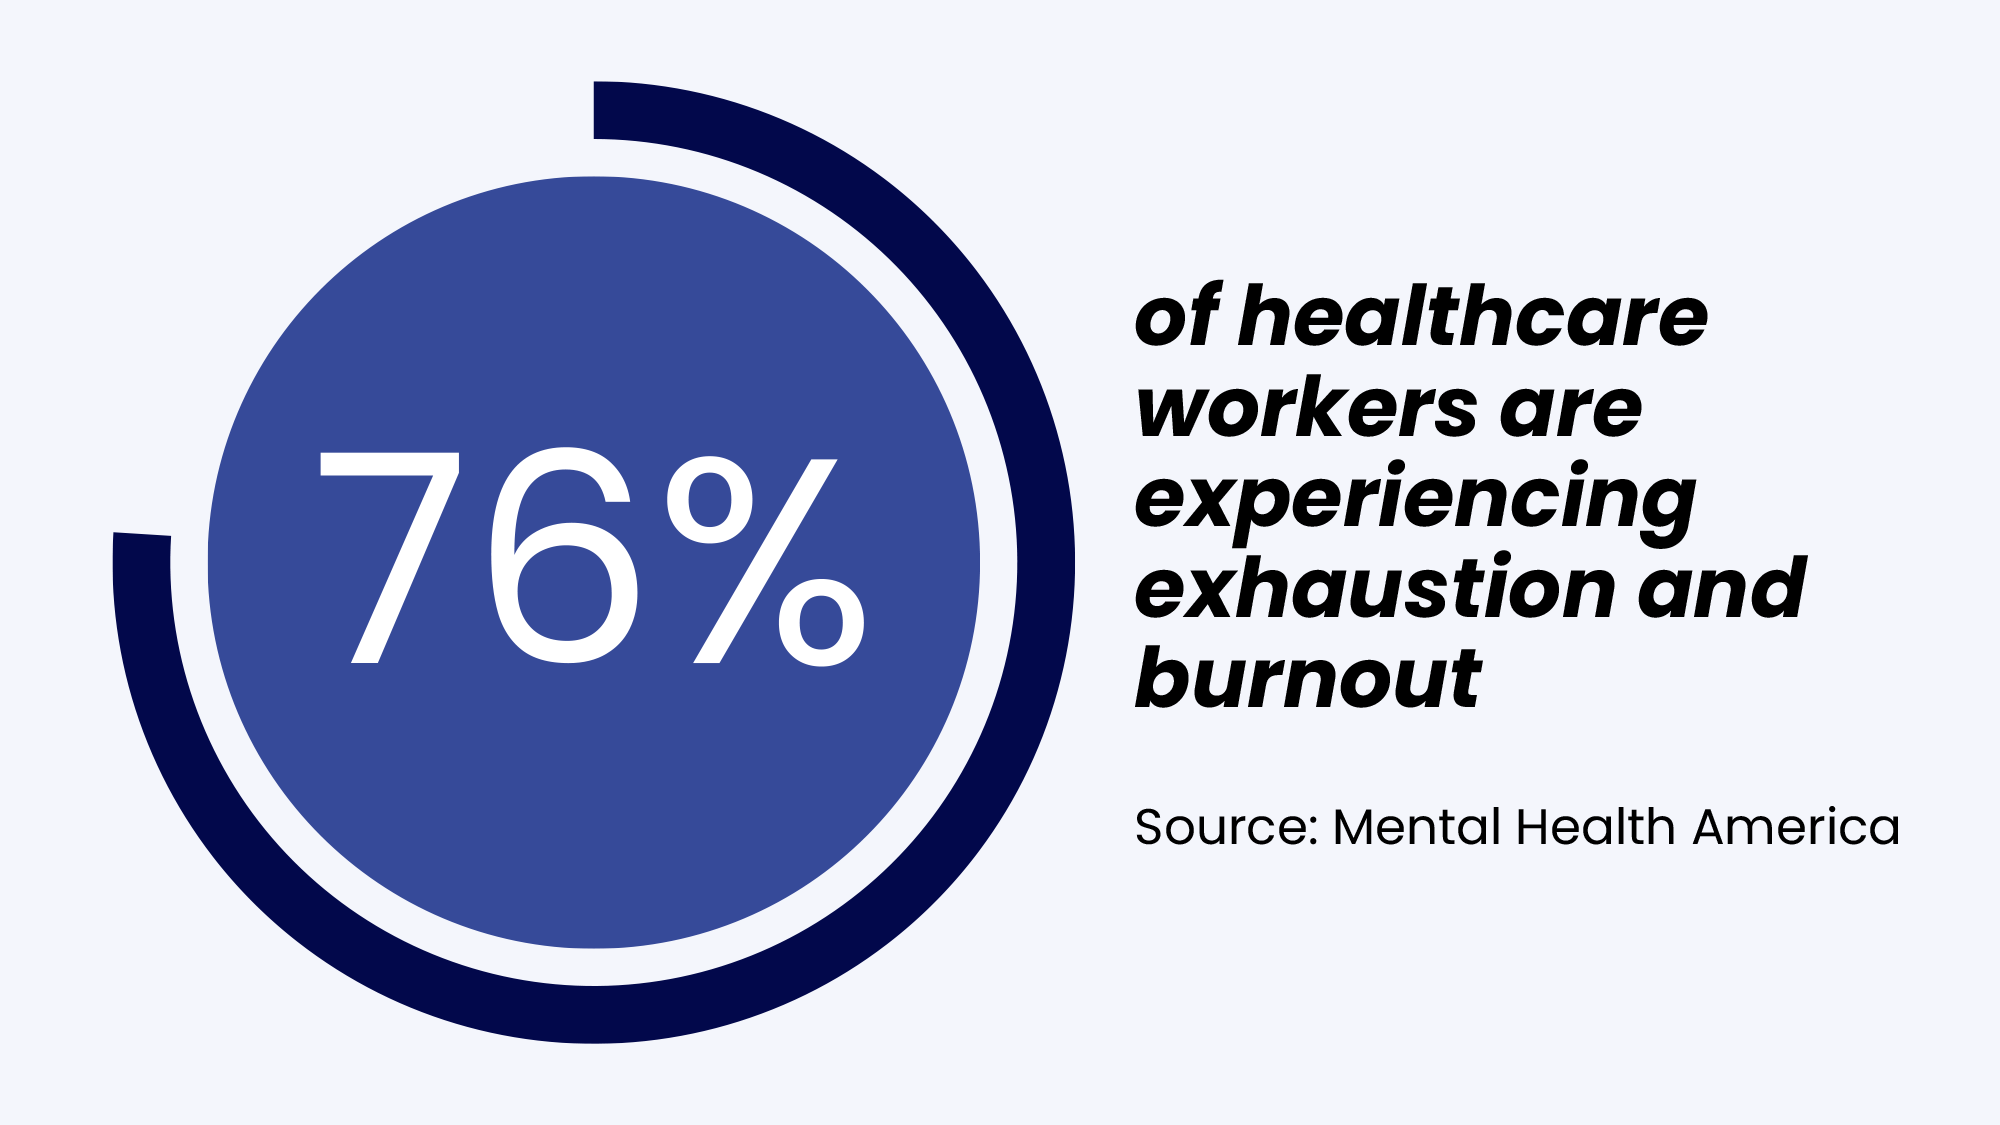 Healthcare workers burnout stat